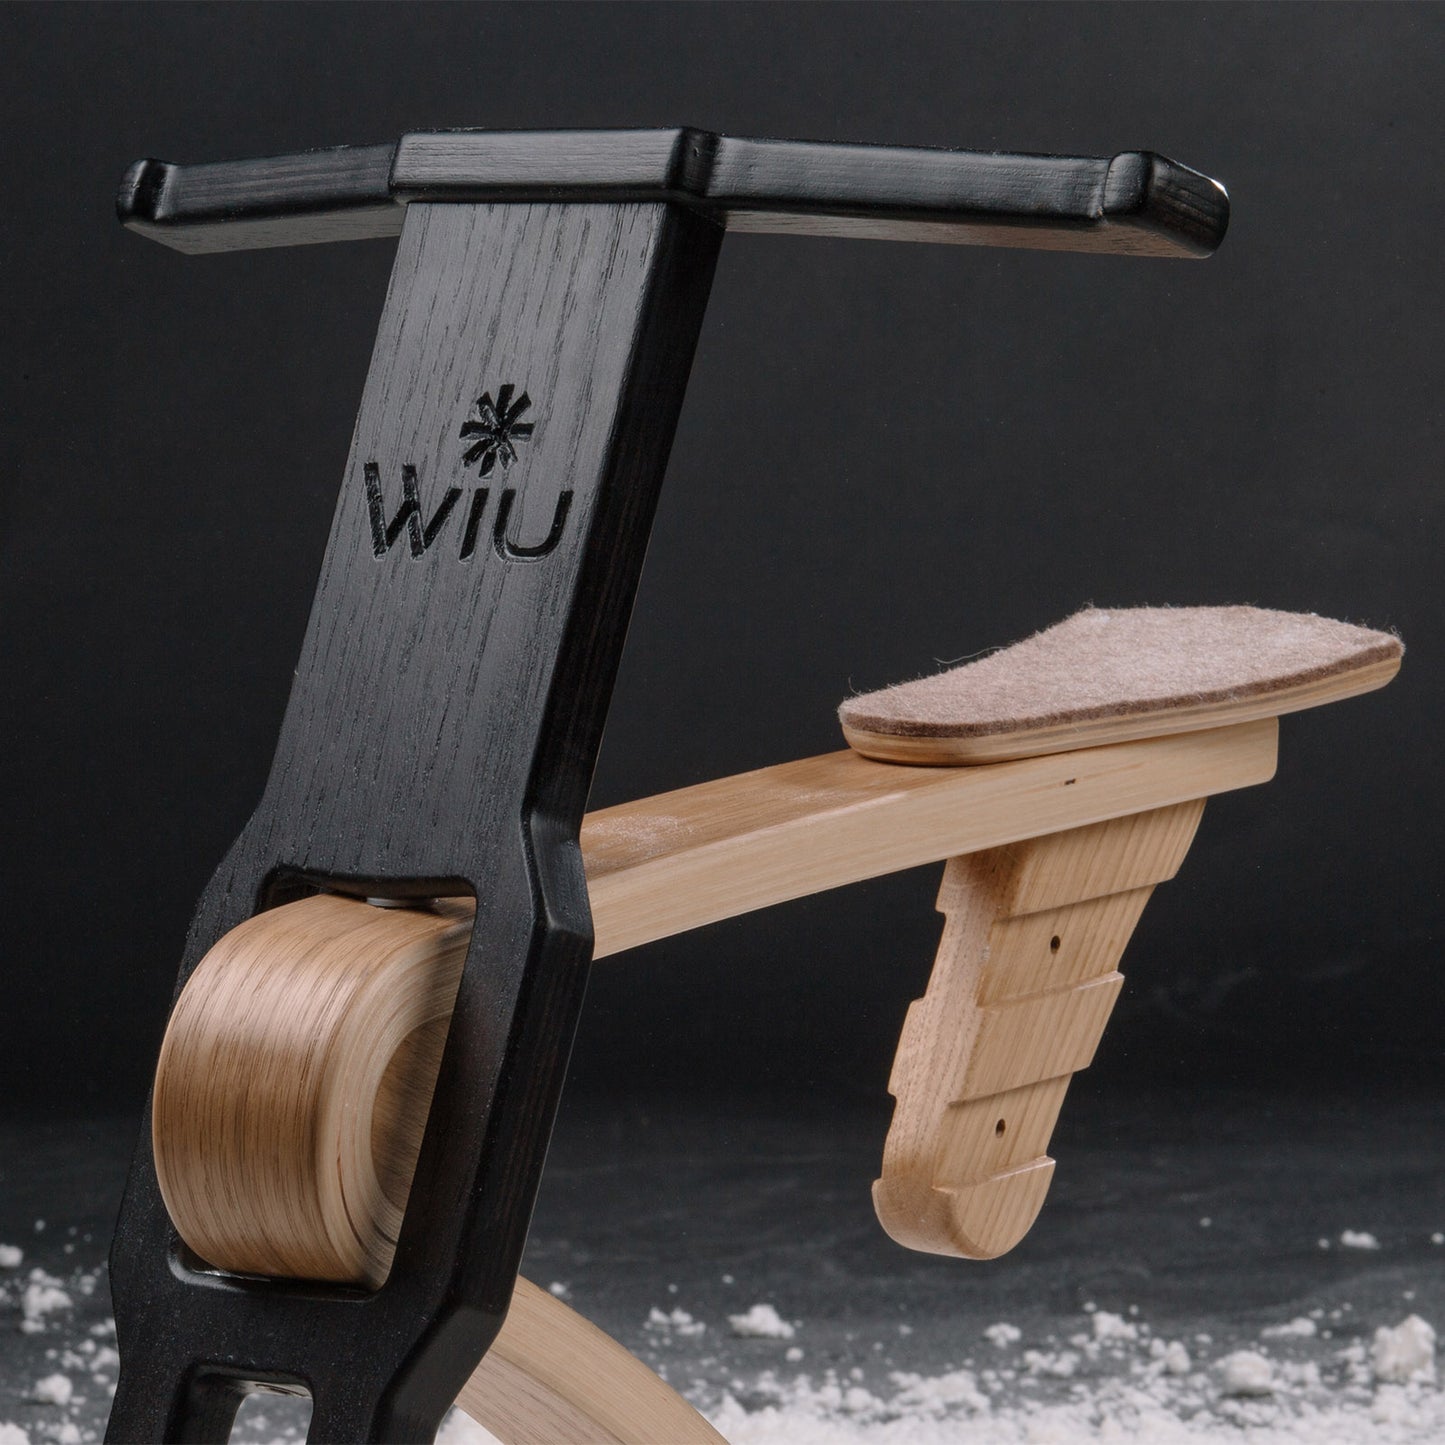 WiU Snow Balance Bike for Kids: The Perfect Winter Toy